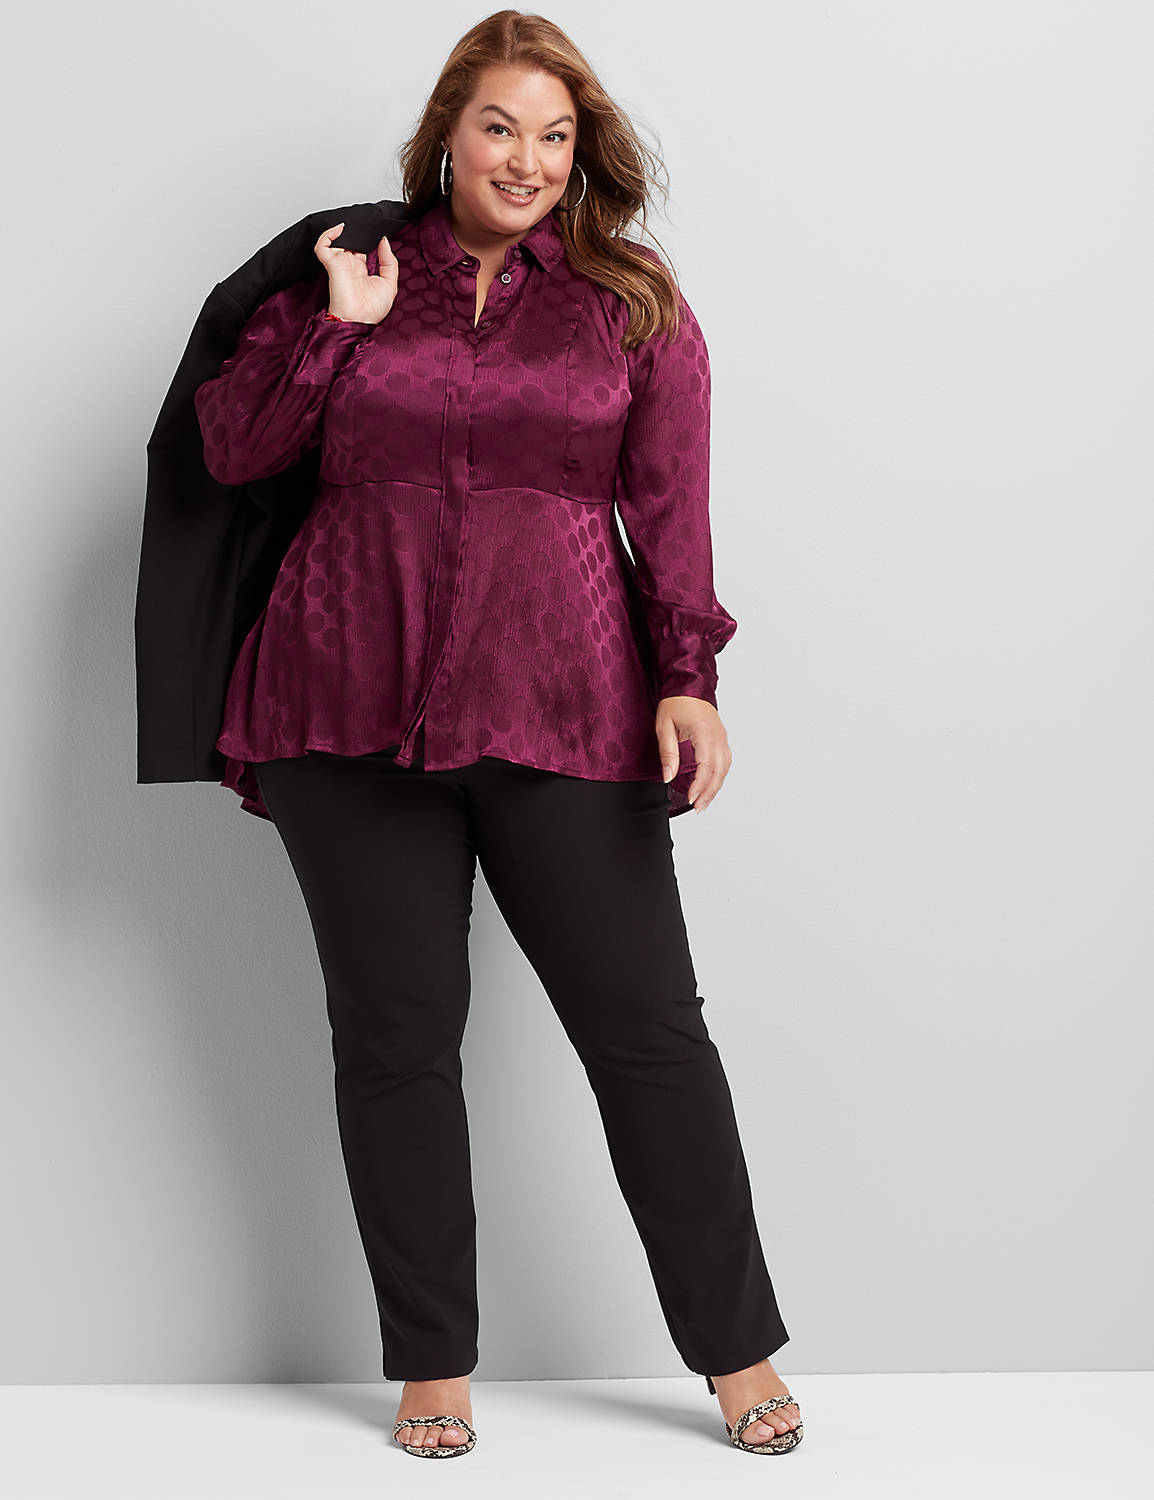 Long Sleeve Button Front High Low Tunic Novelty Jacquard Blouse 1114689:PANTONE Pickled Beet:14 Product Image 3